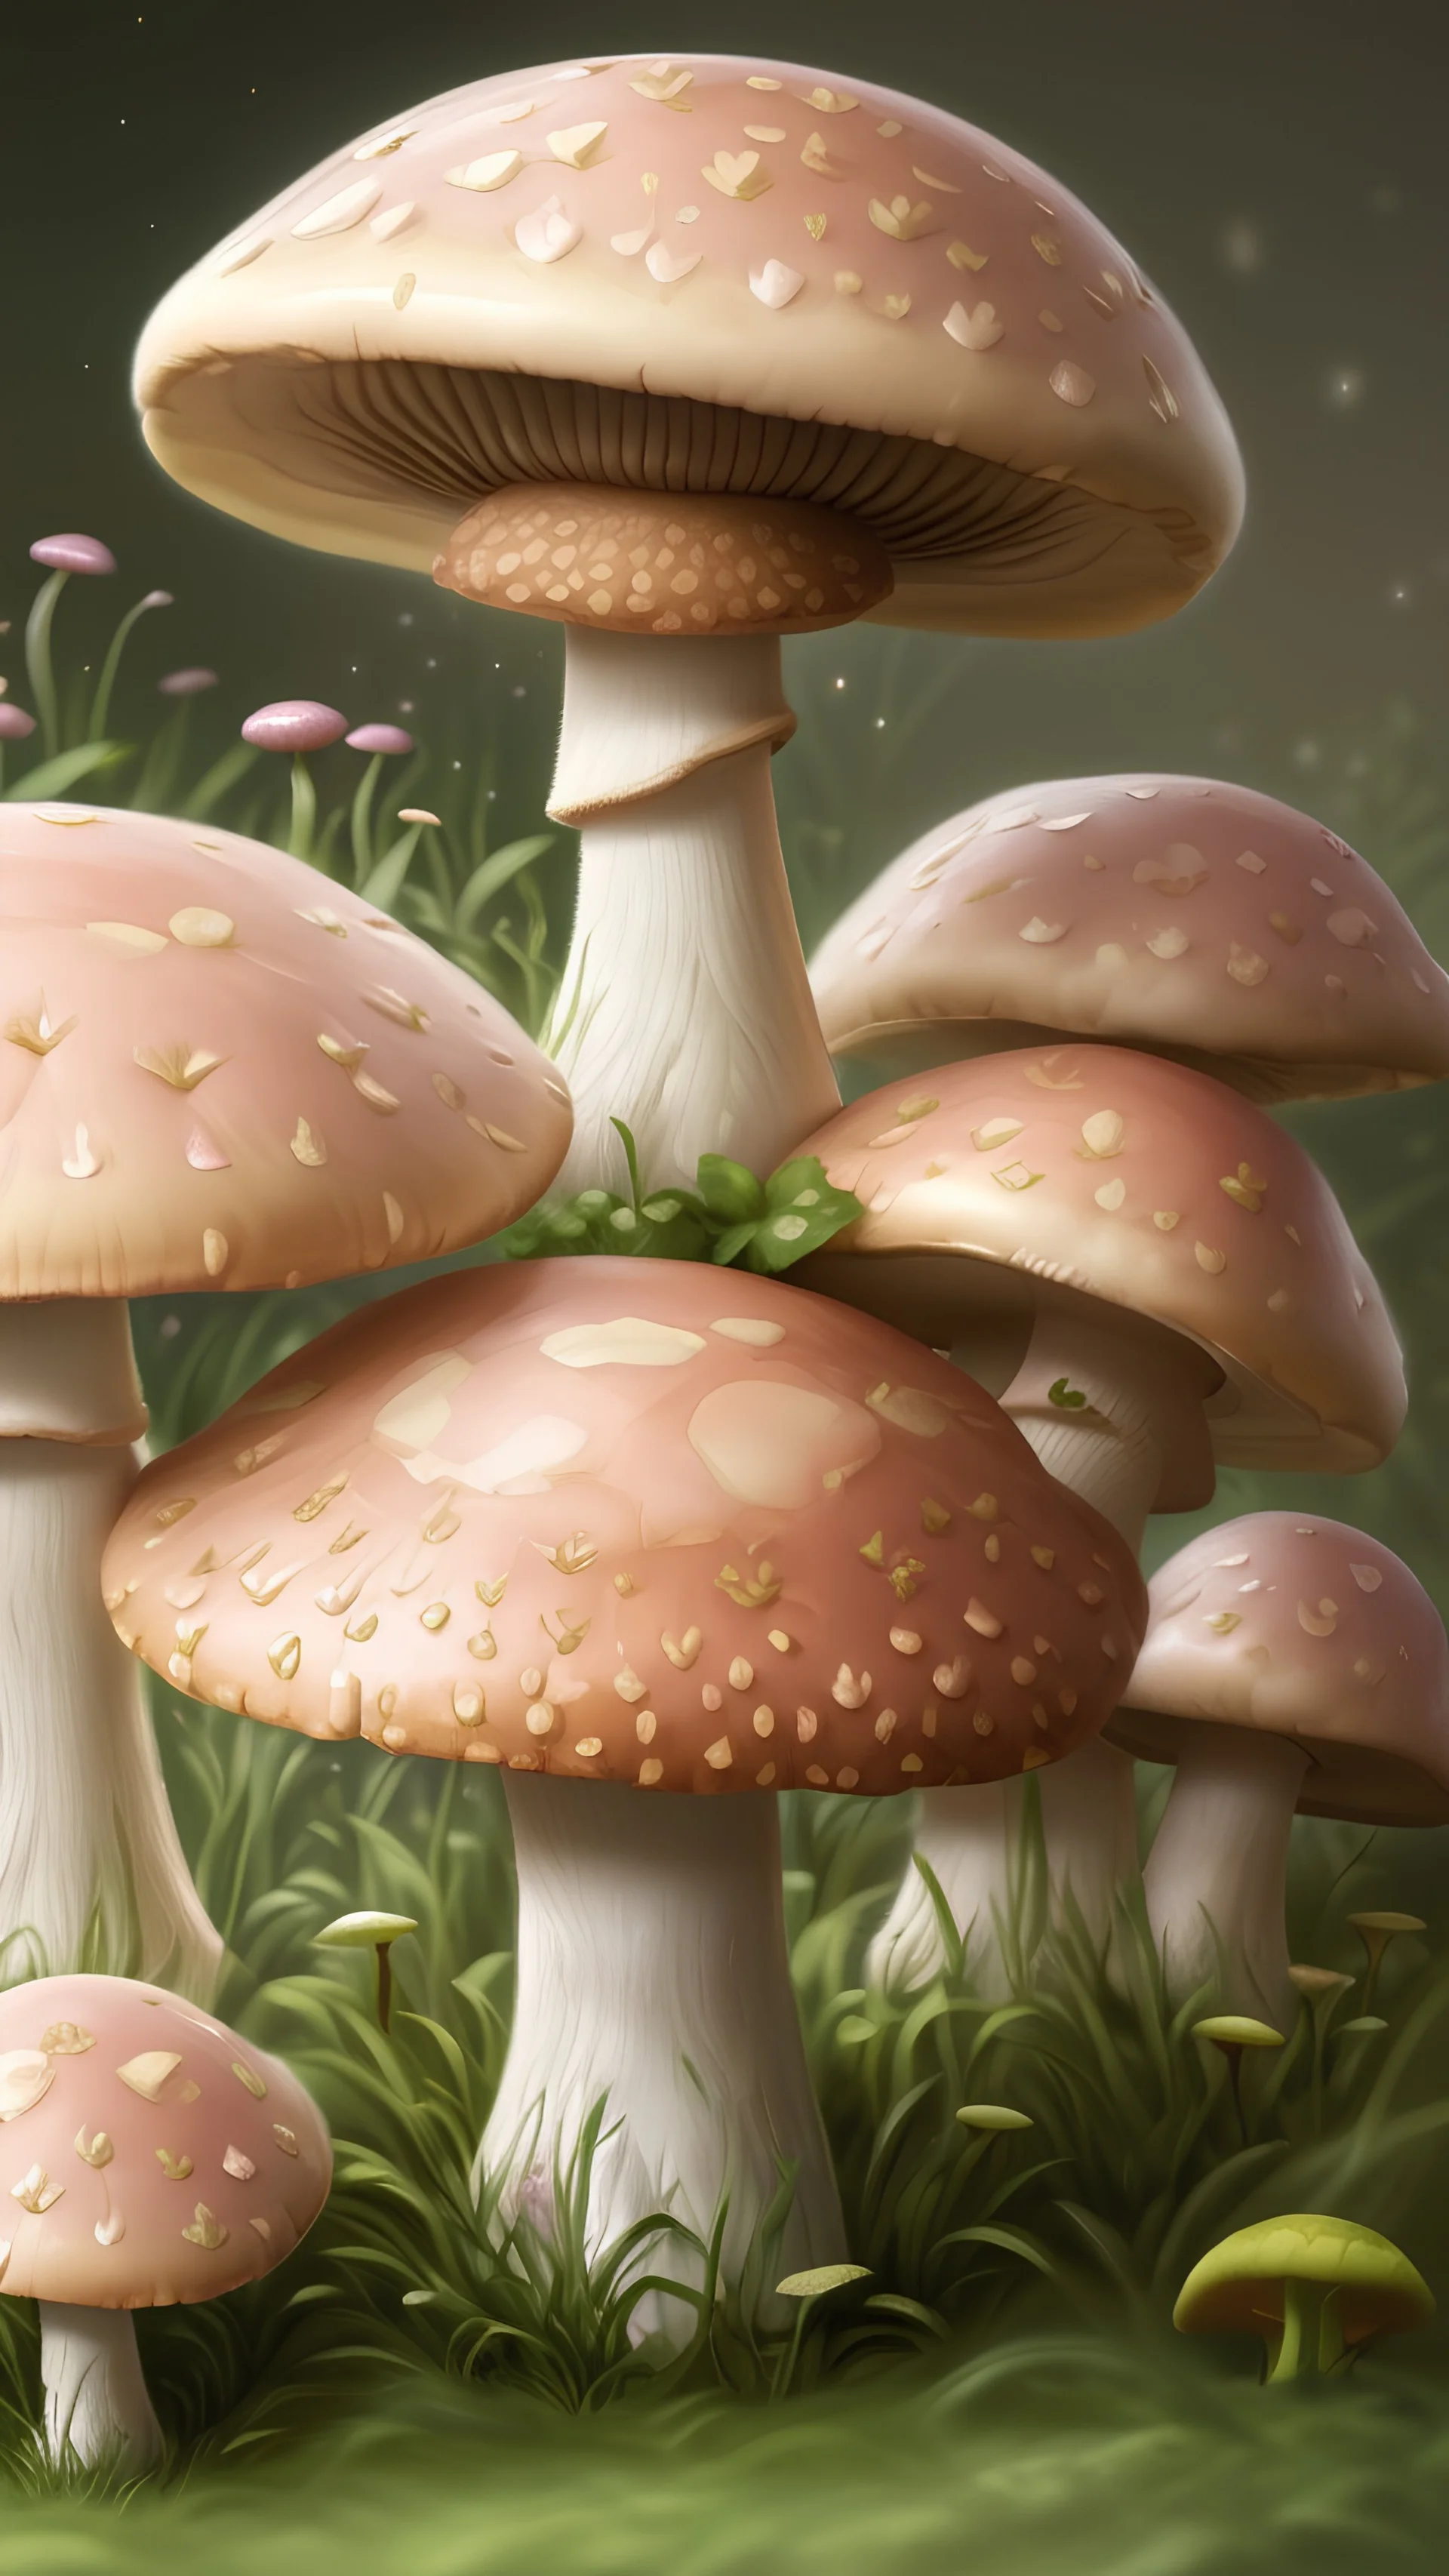 Mushroom biome closeup, light reflection, pastel colors, pink and green, hd, detailed, full 4k resolution